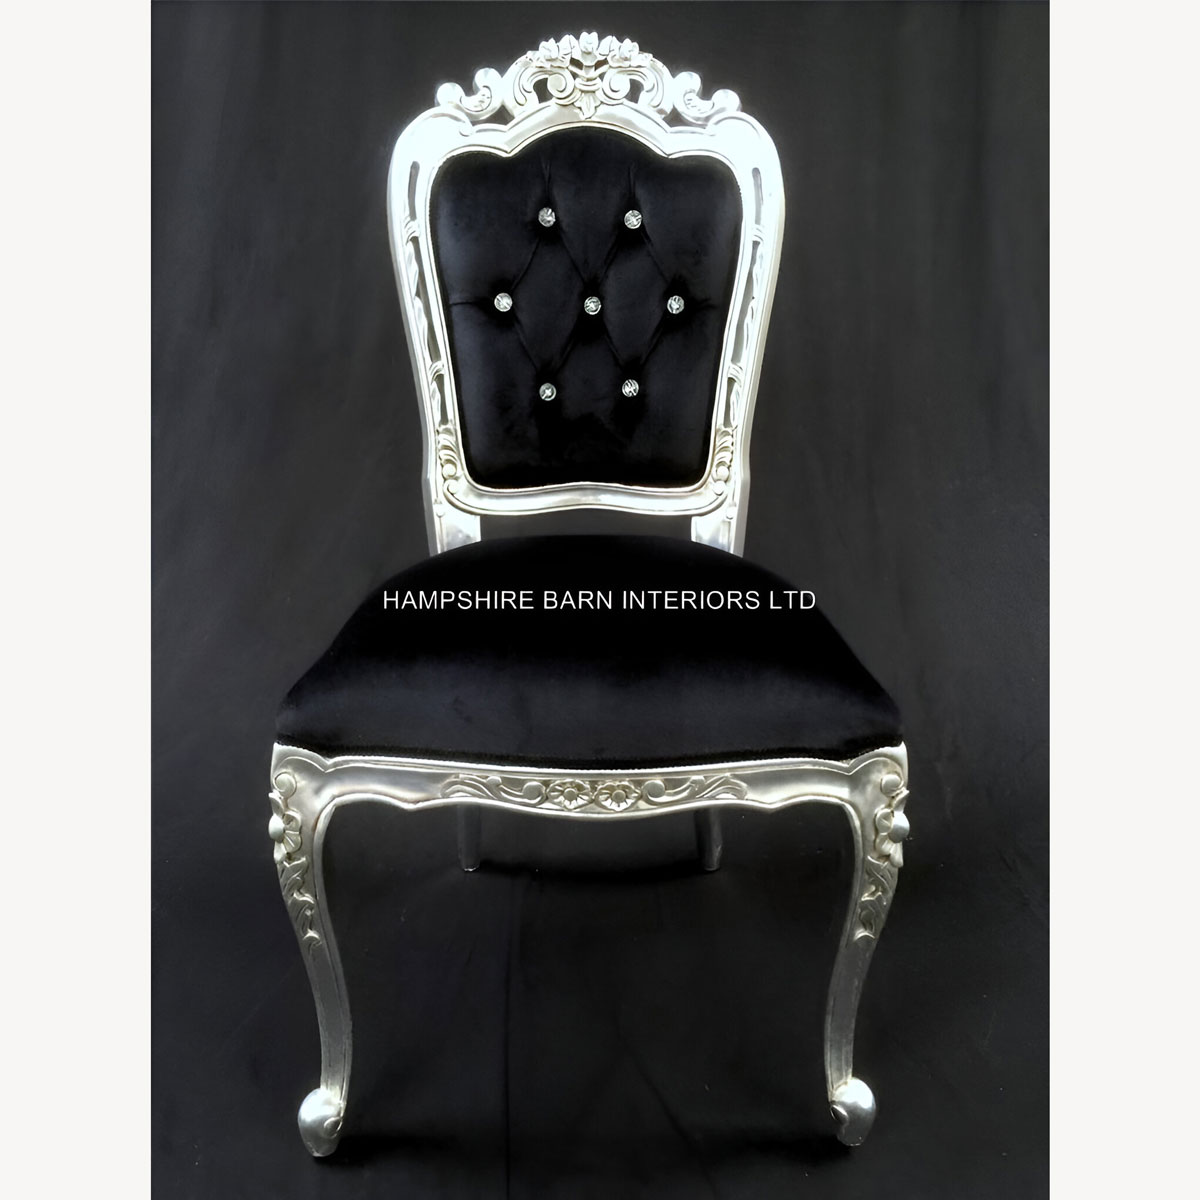 Franciscan Chair In Silver Leaf Black Velvet And Crystals Dining Or Occasional 4 - Hampshire Barn Interiors - Franciscan Chair In Silver Leaf Black Velvet And Crystals (Dining Or Occasional) -